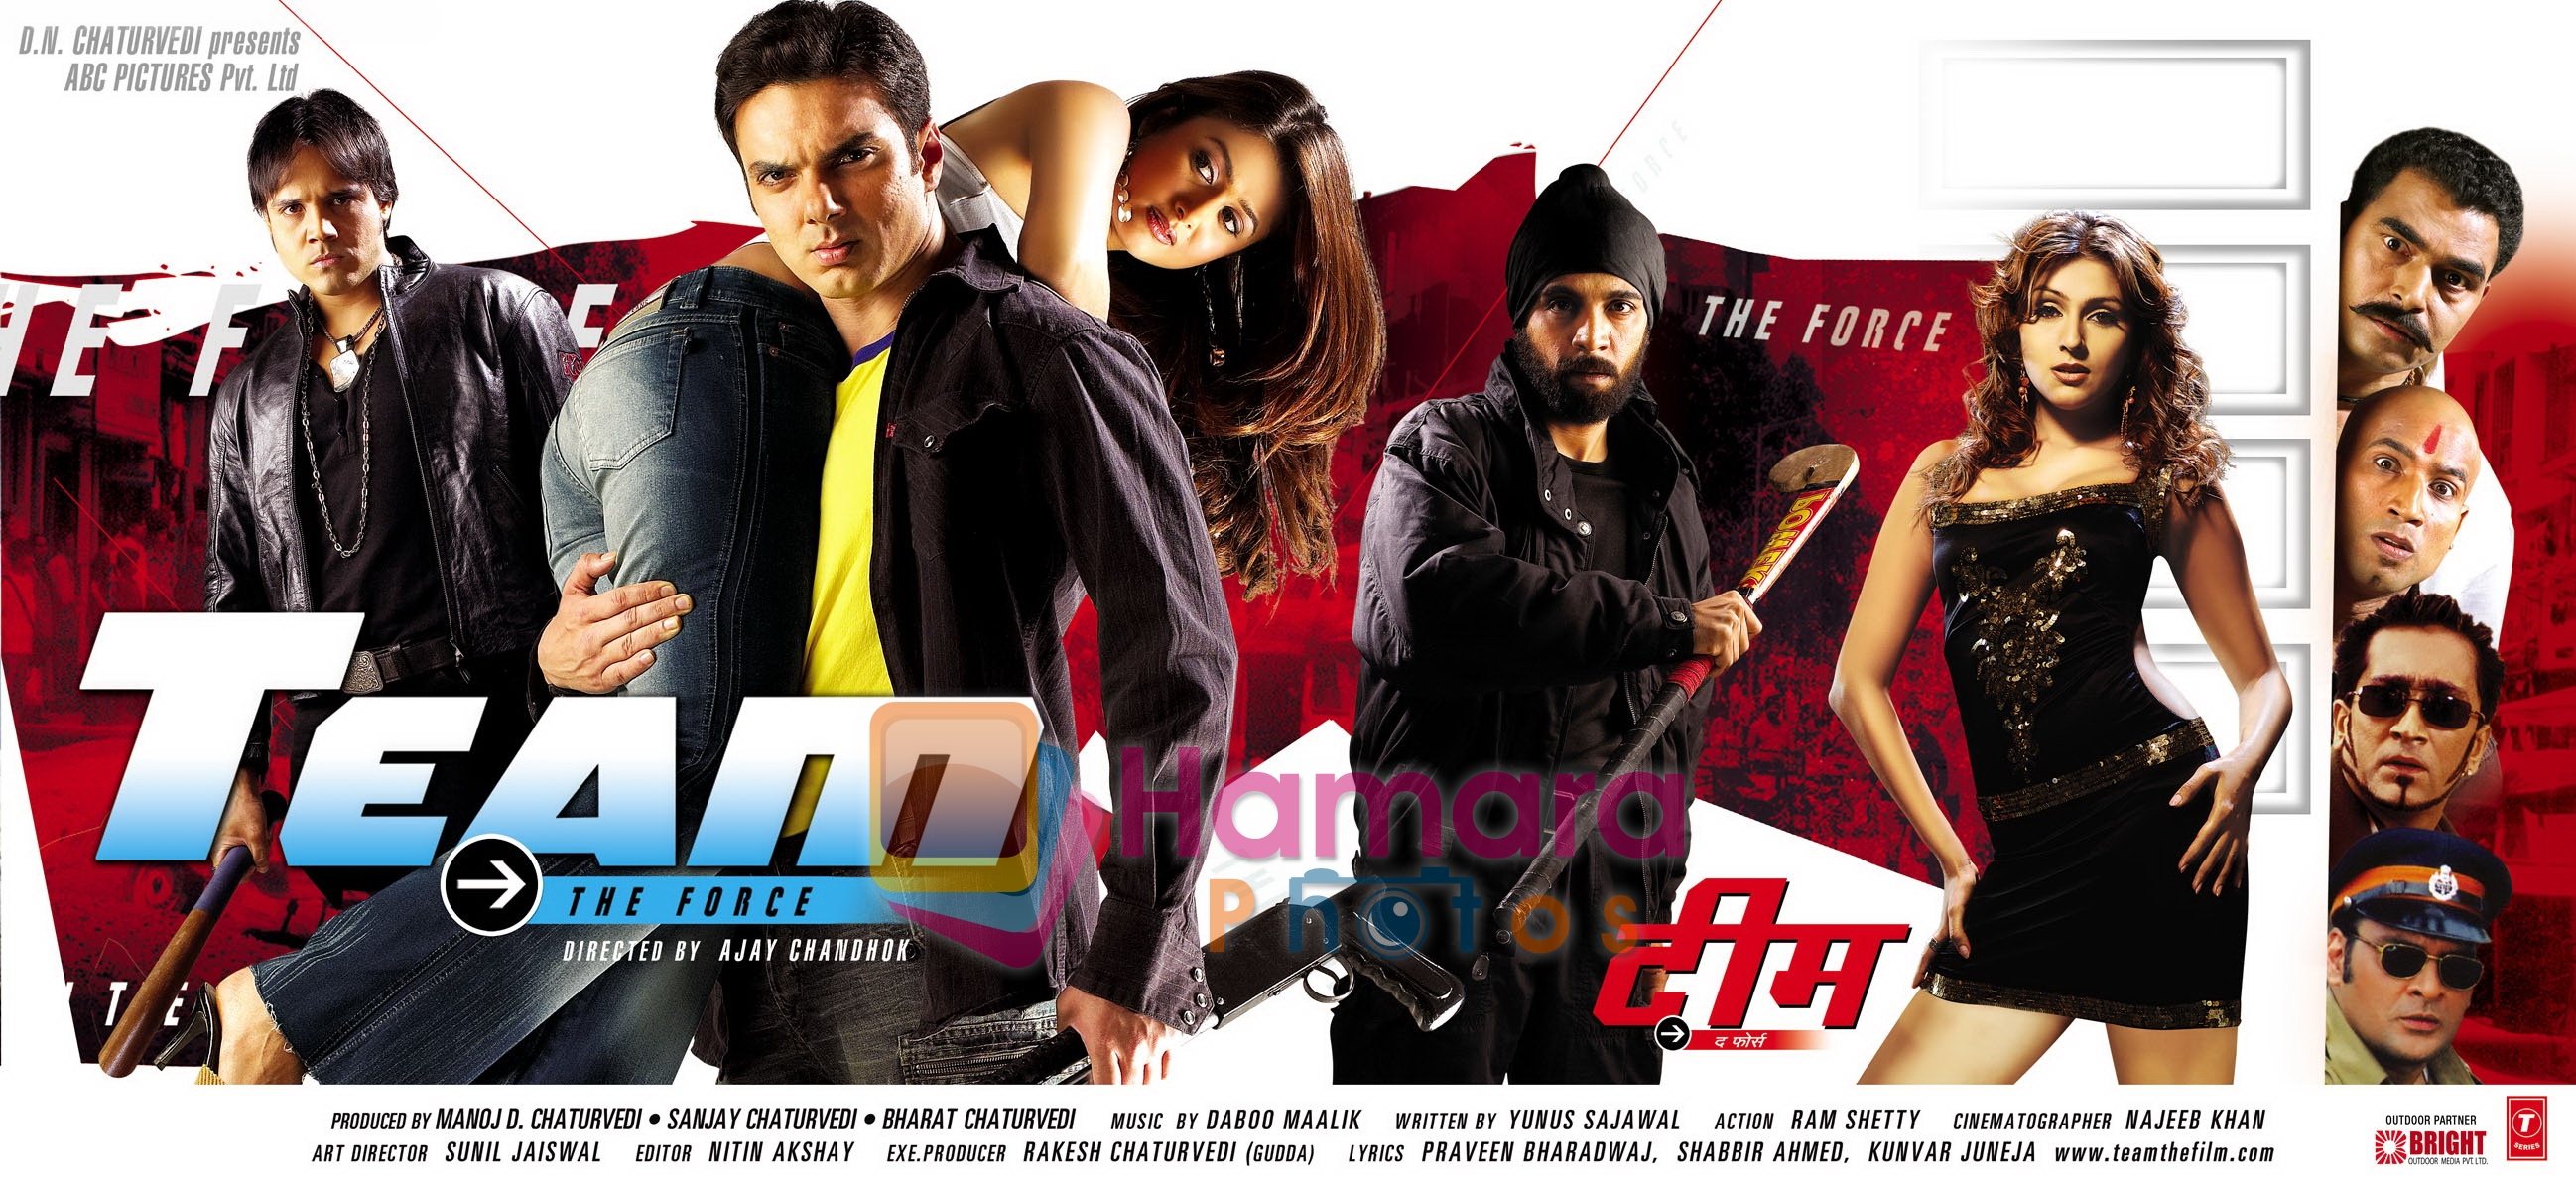 Sohail Khan, Amrita Arora, Aarti Chhabria, Yash Tonk in the still from movie Team- The Force 